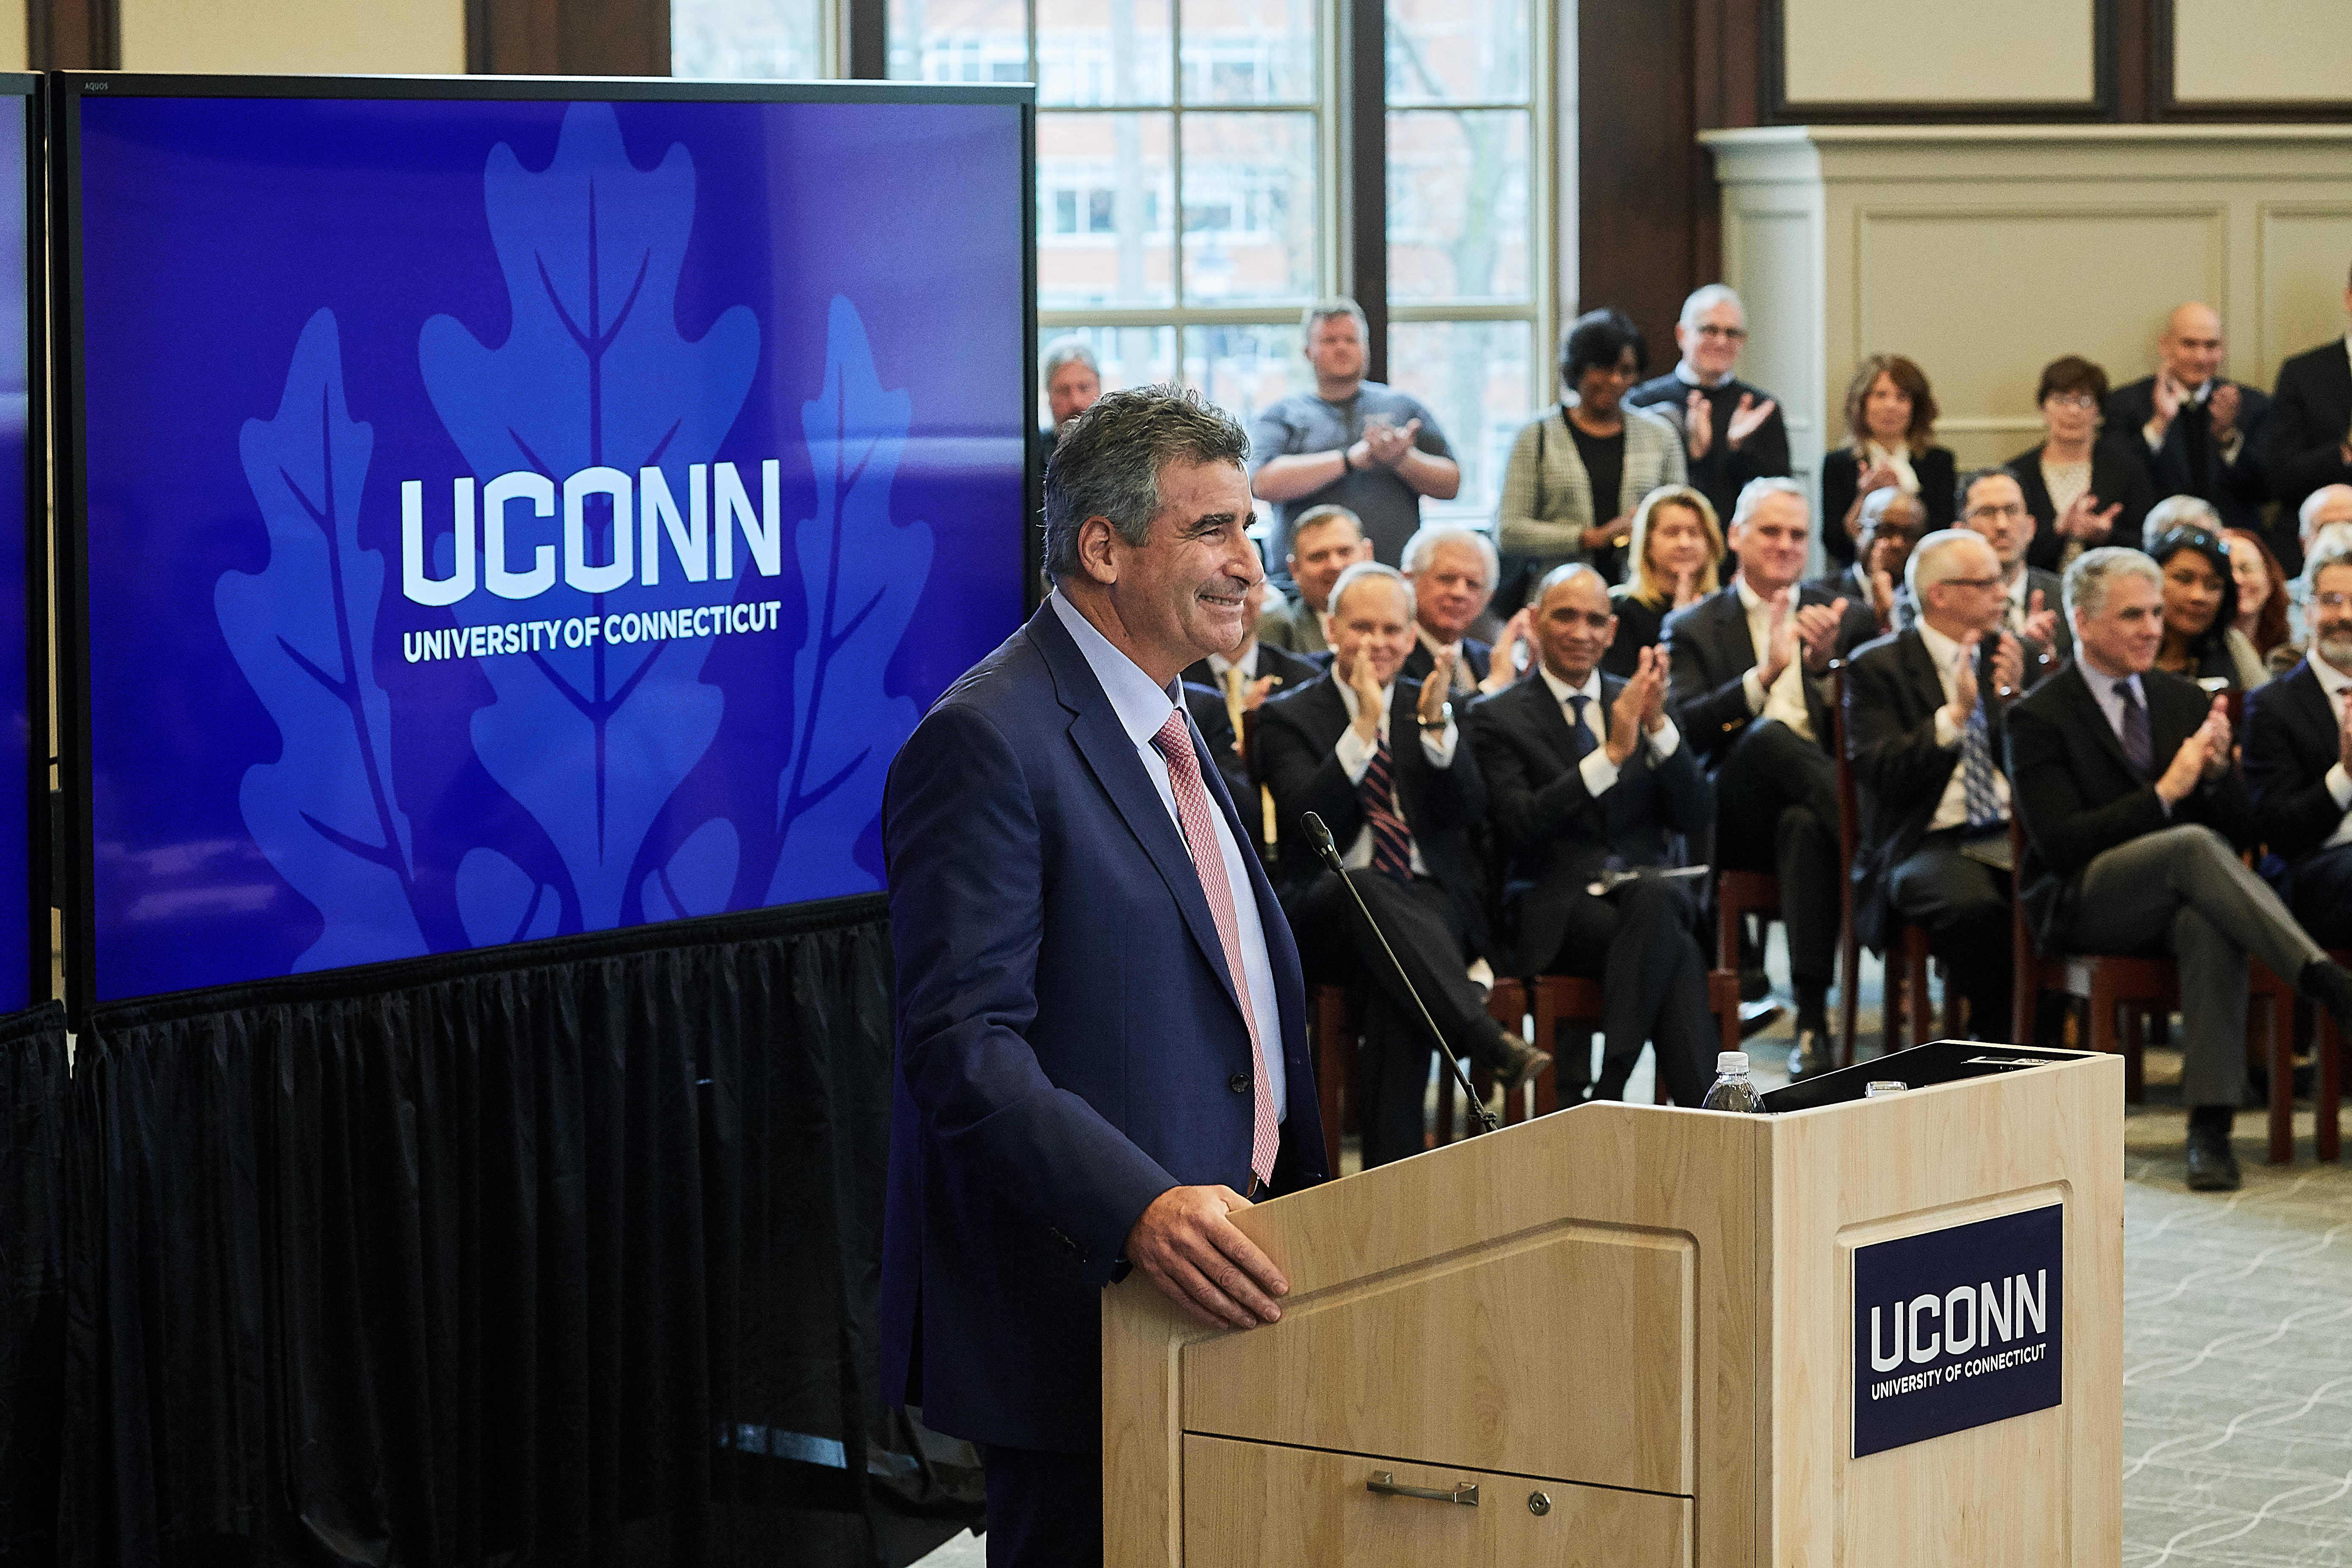 President designate Thomas C. Katsouleas receives applause following his address to the Board of Trustees after being appointed as the 16th University president on Feb. 5, 2019. (Peter Morenus/UConn Photo)